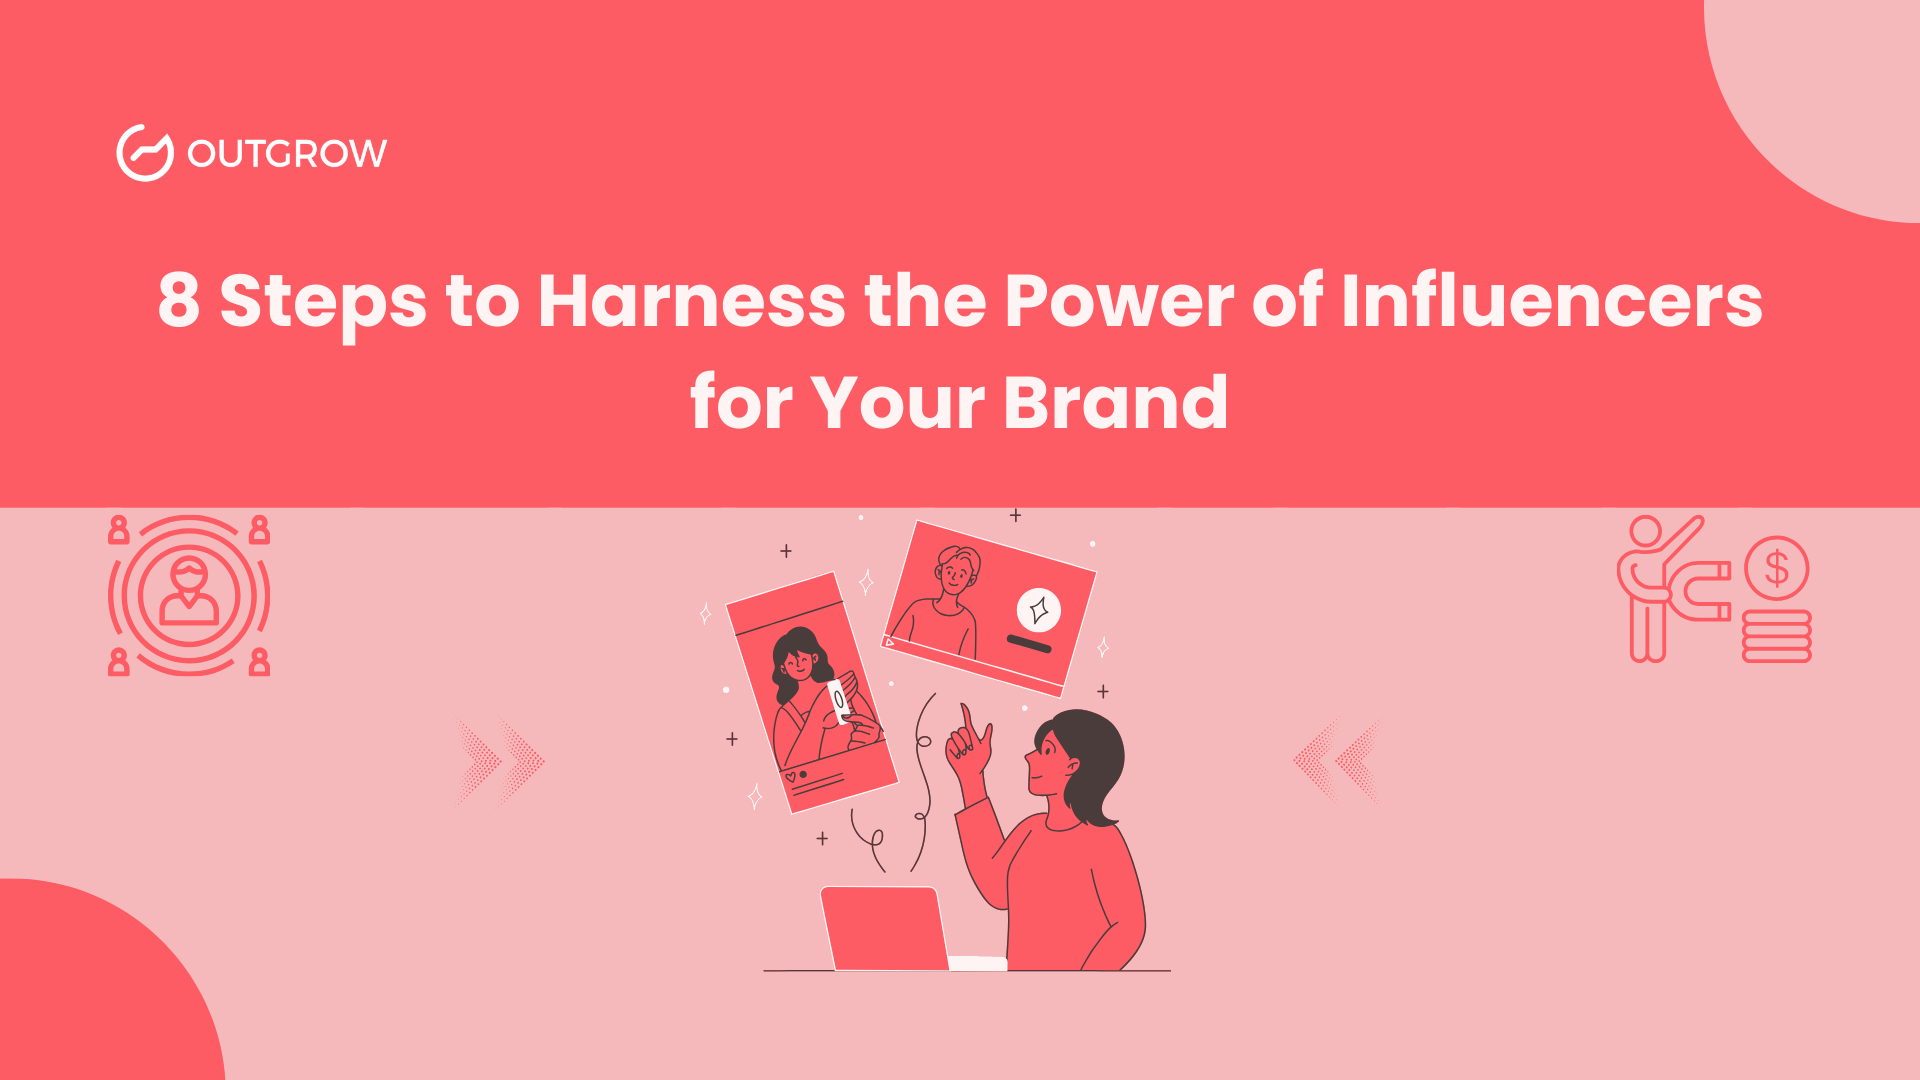 8 Steps to Harness the Power of Influencers for Your Brand